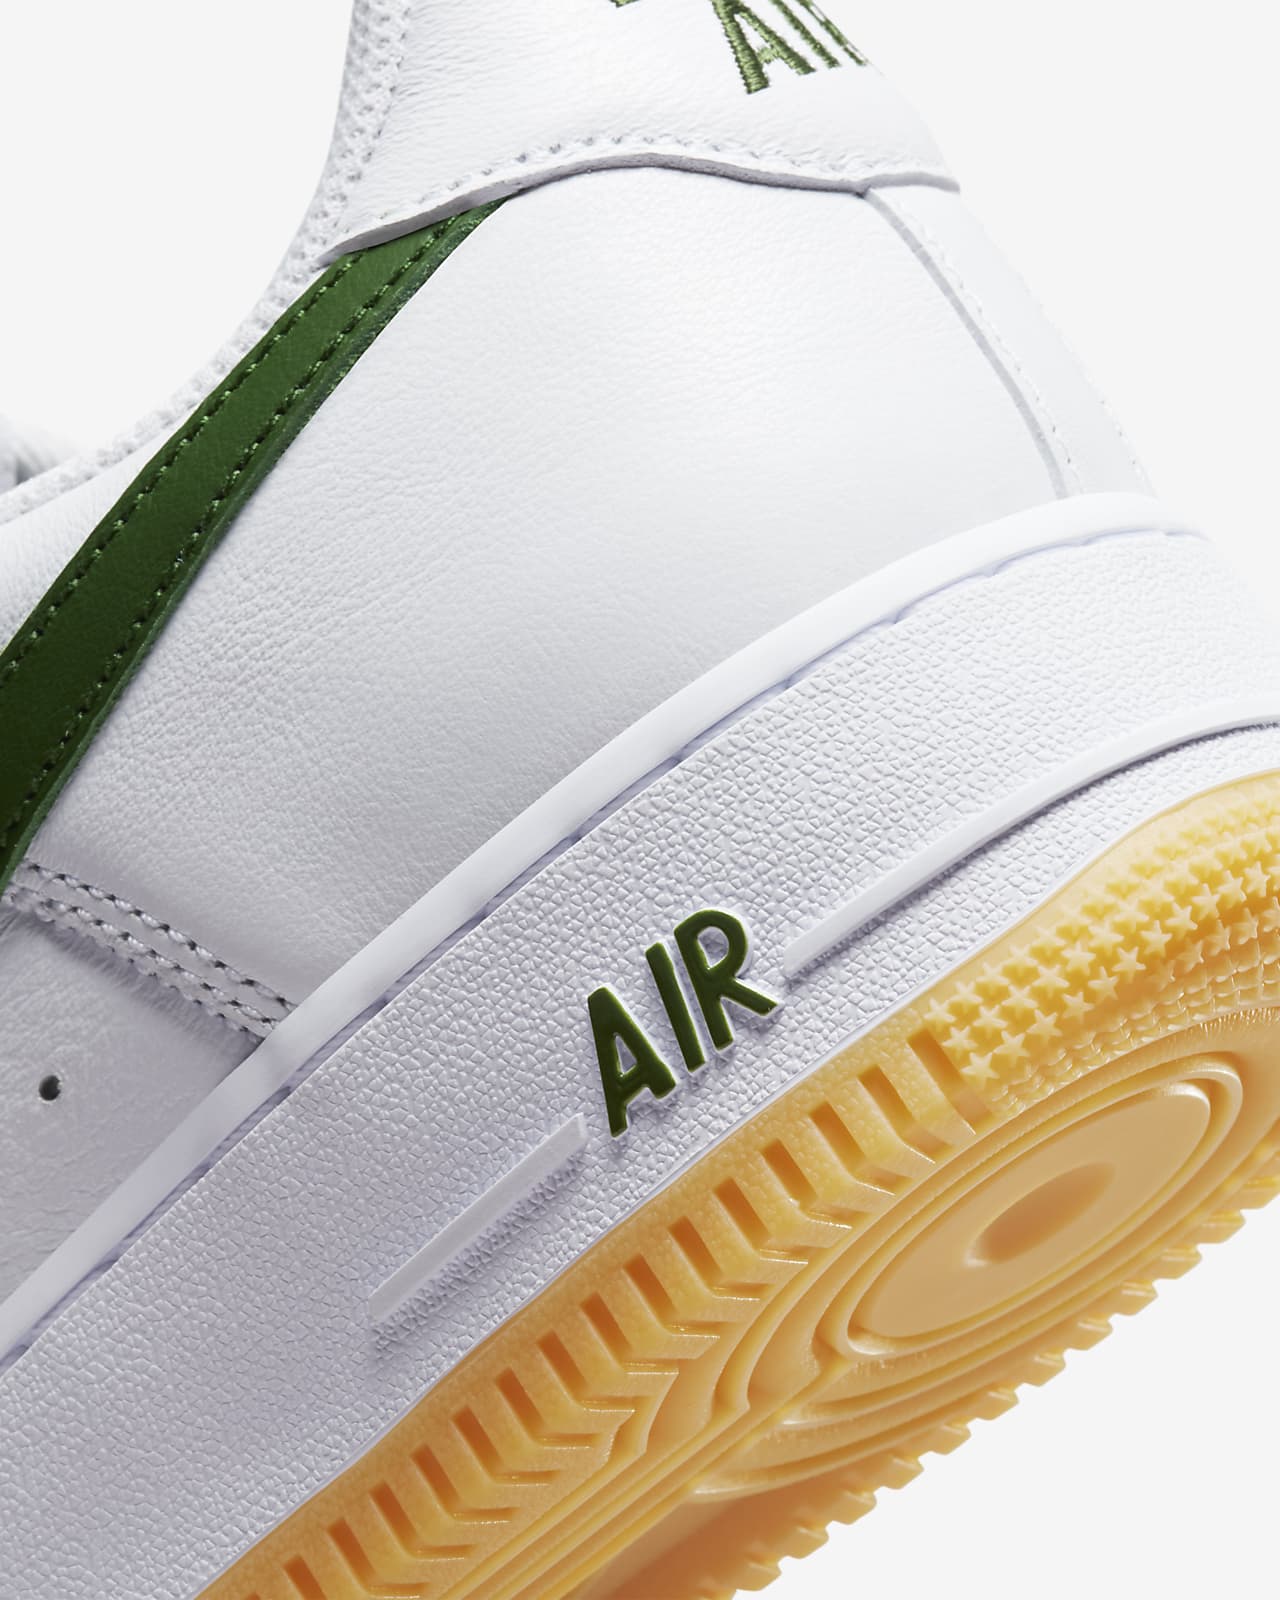 Nike SB Delivers Another Air Force 2 Low - Sneaker Freaker